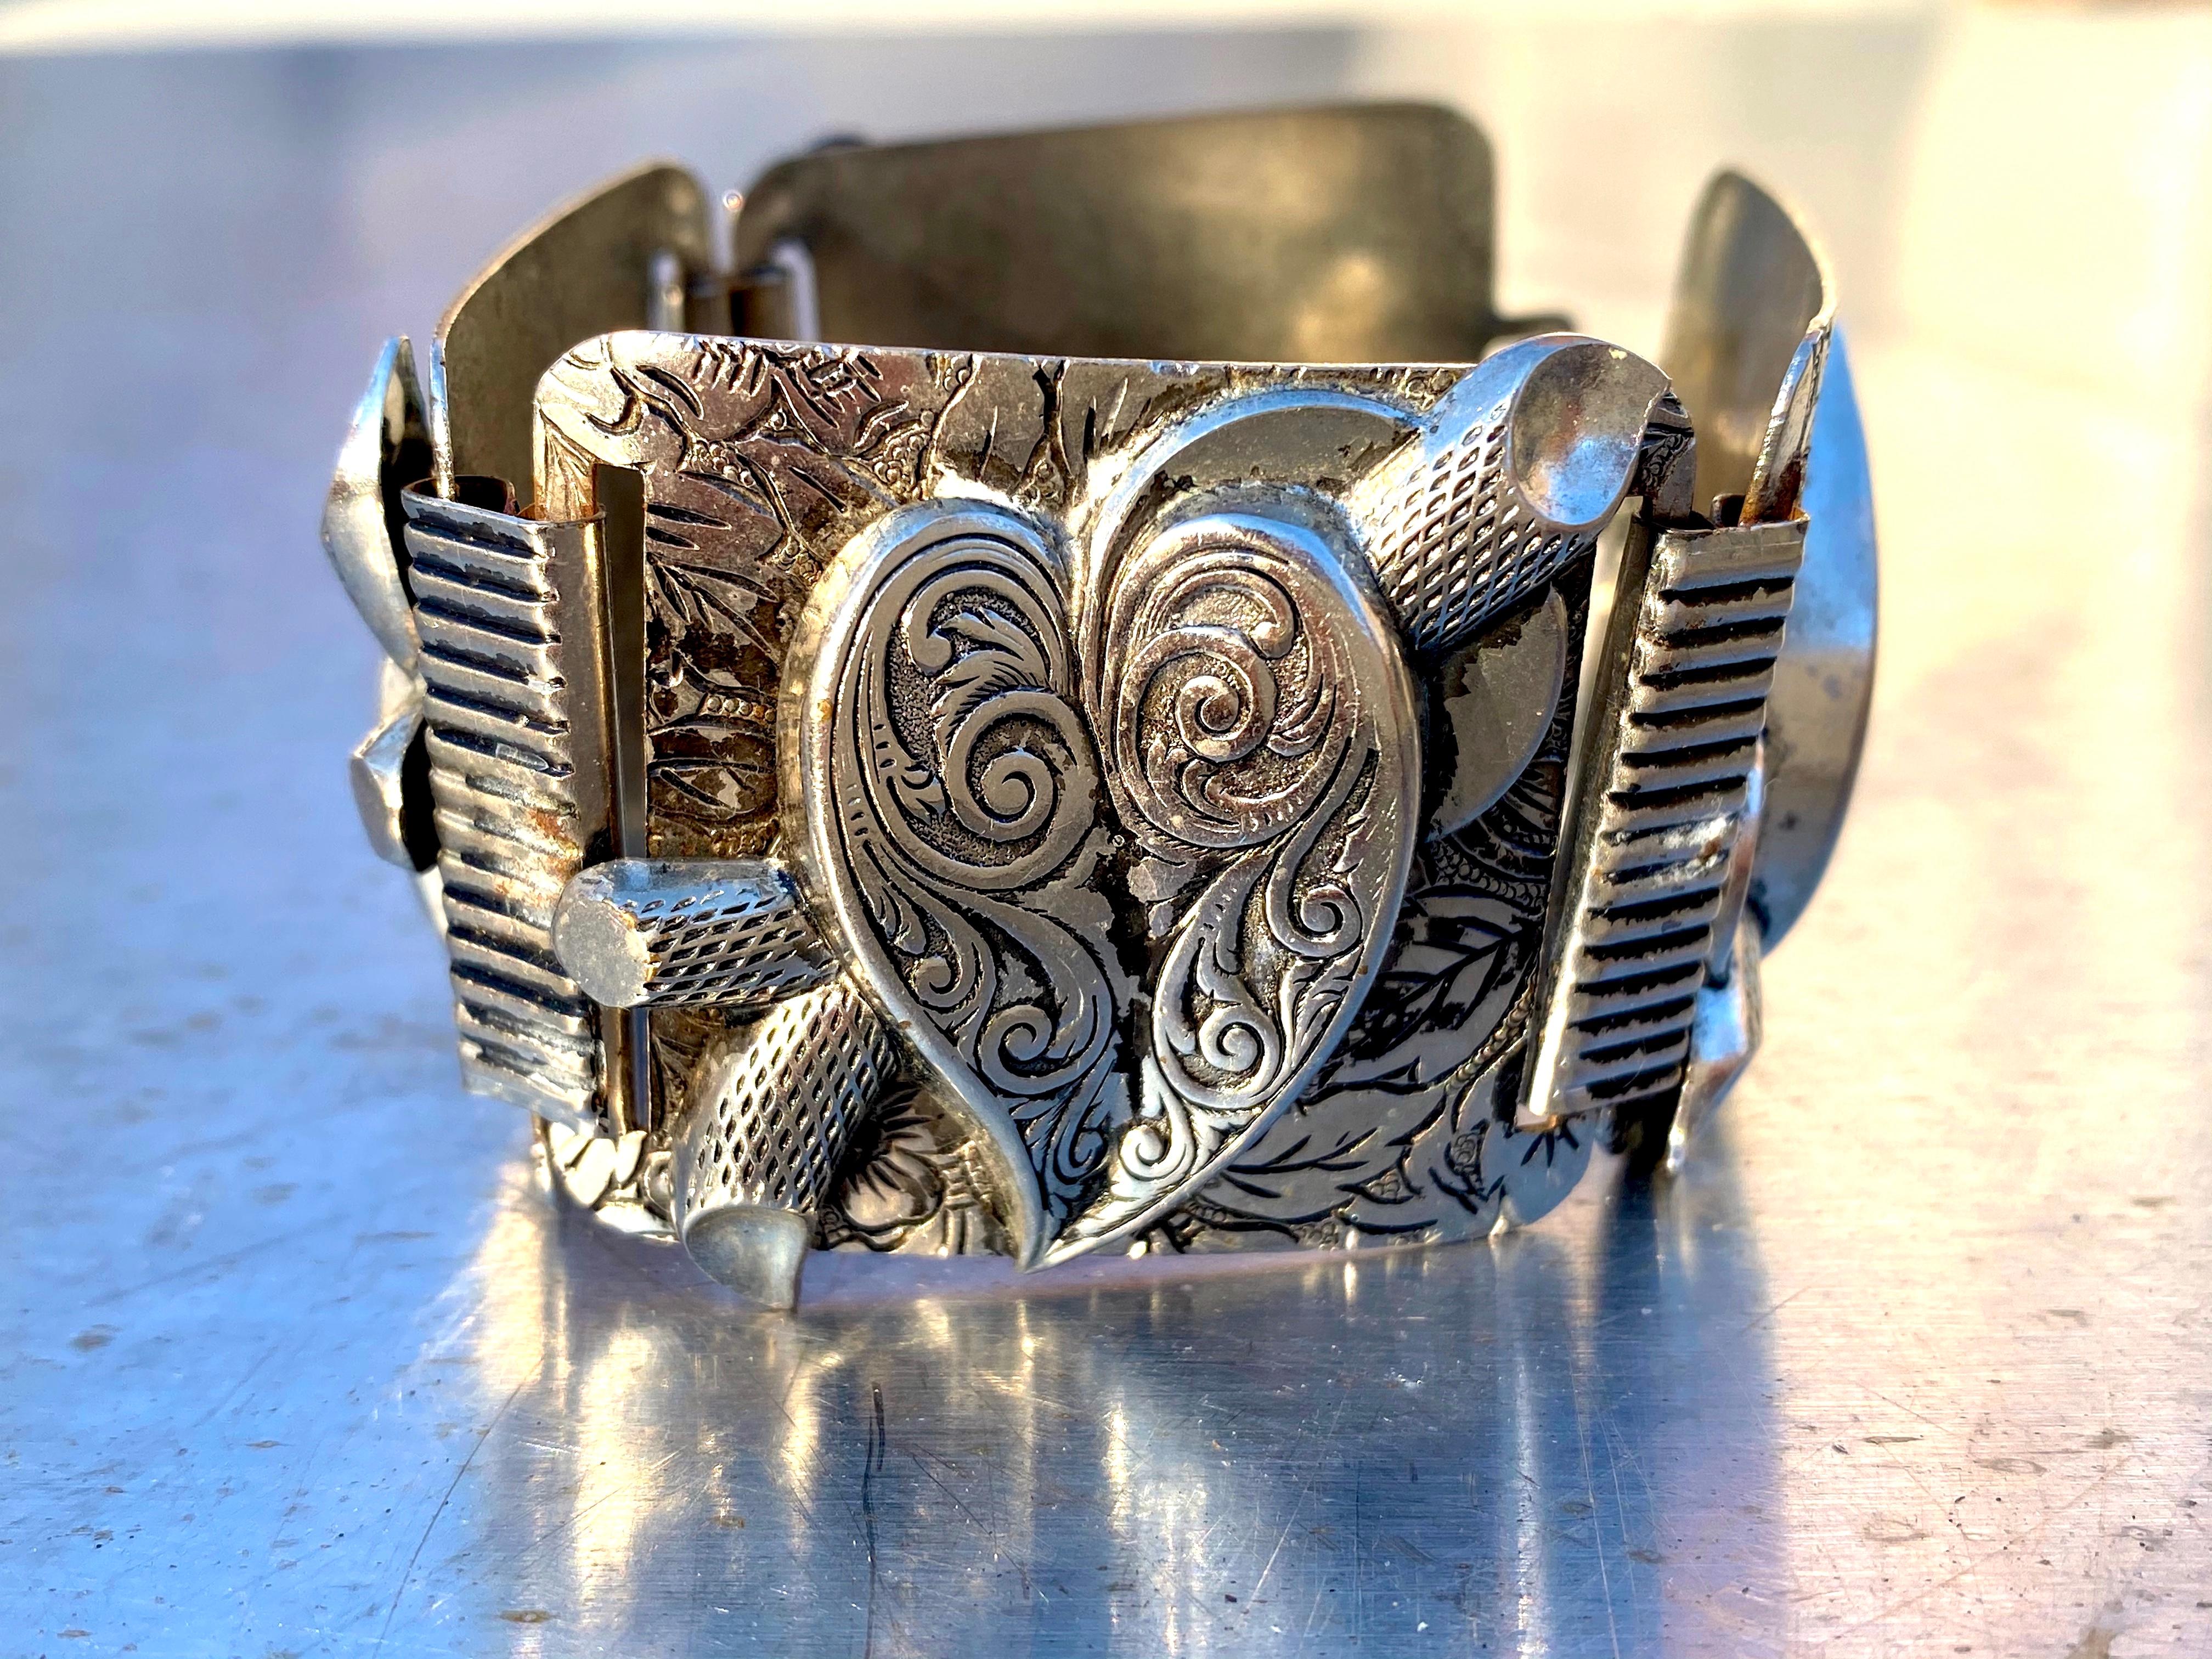 Fabulous and stunning design of hearts in reverse order, straight up and upside down creating one of the most incredible vintage aluminum bracelets I have ever seen.  Simply chic, visually graphic and a real statement piece. Retro art at its best. 